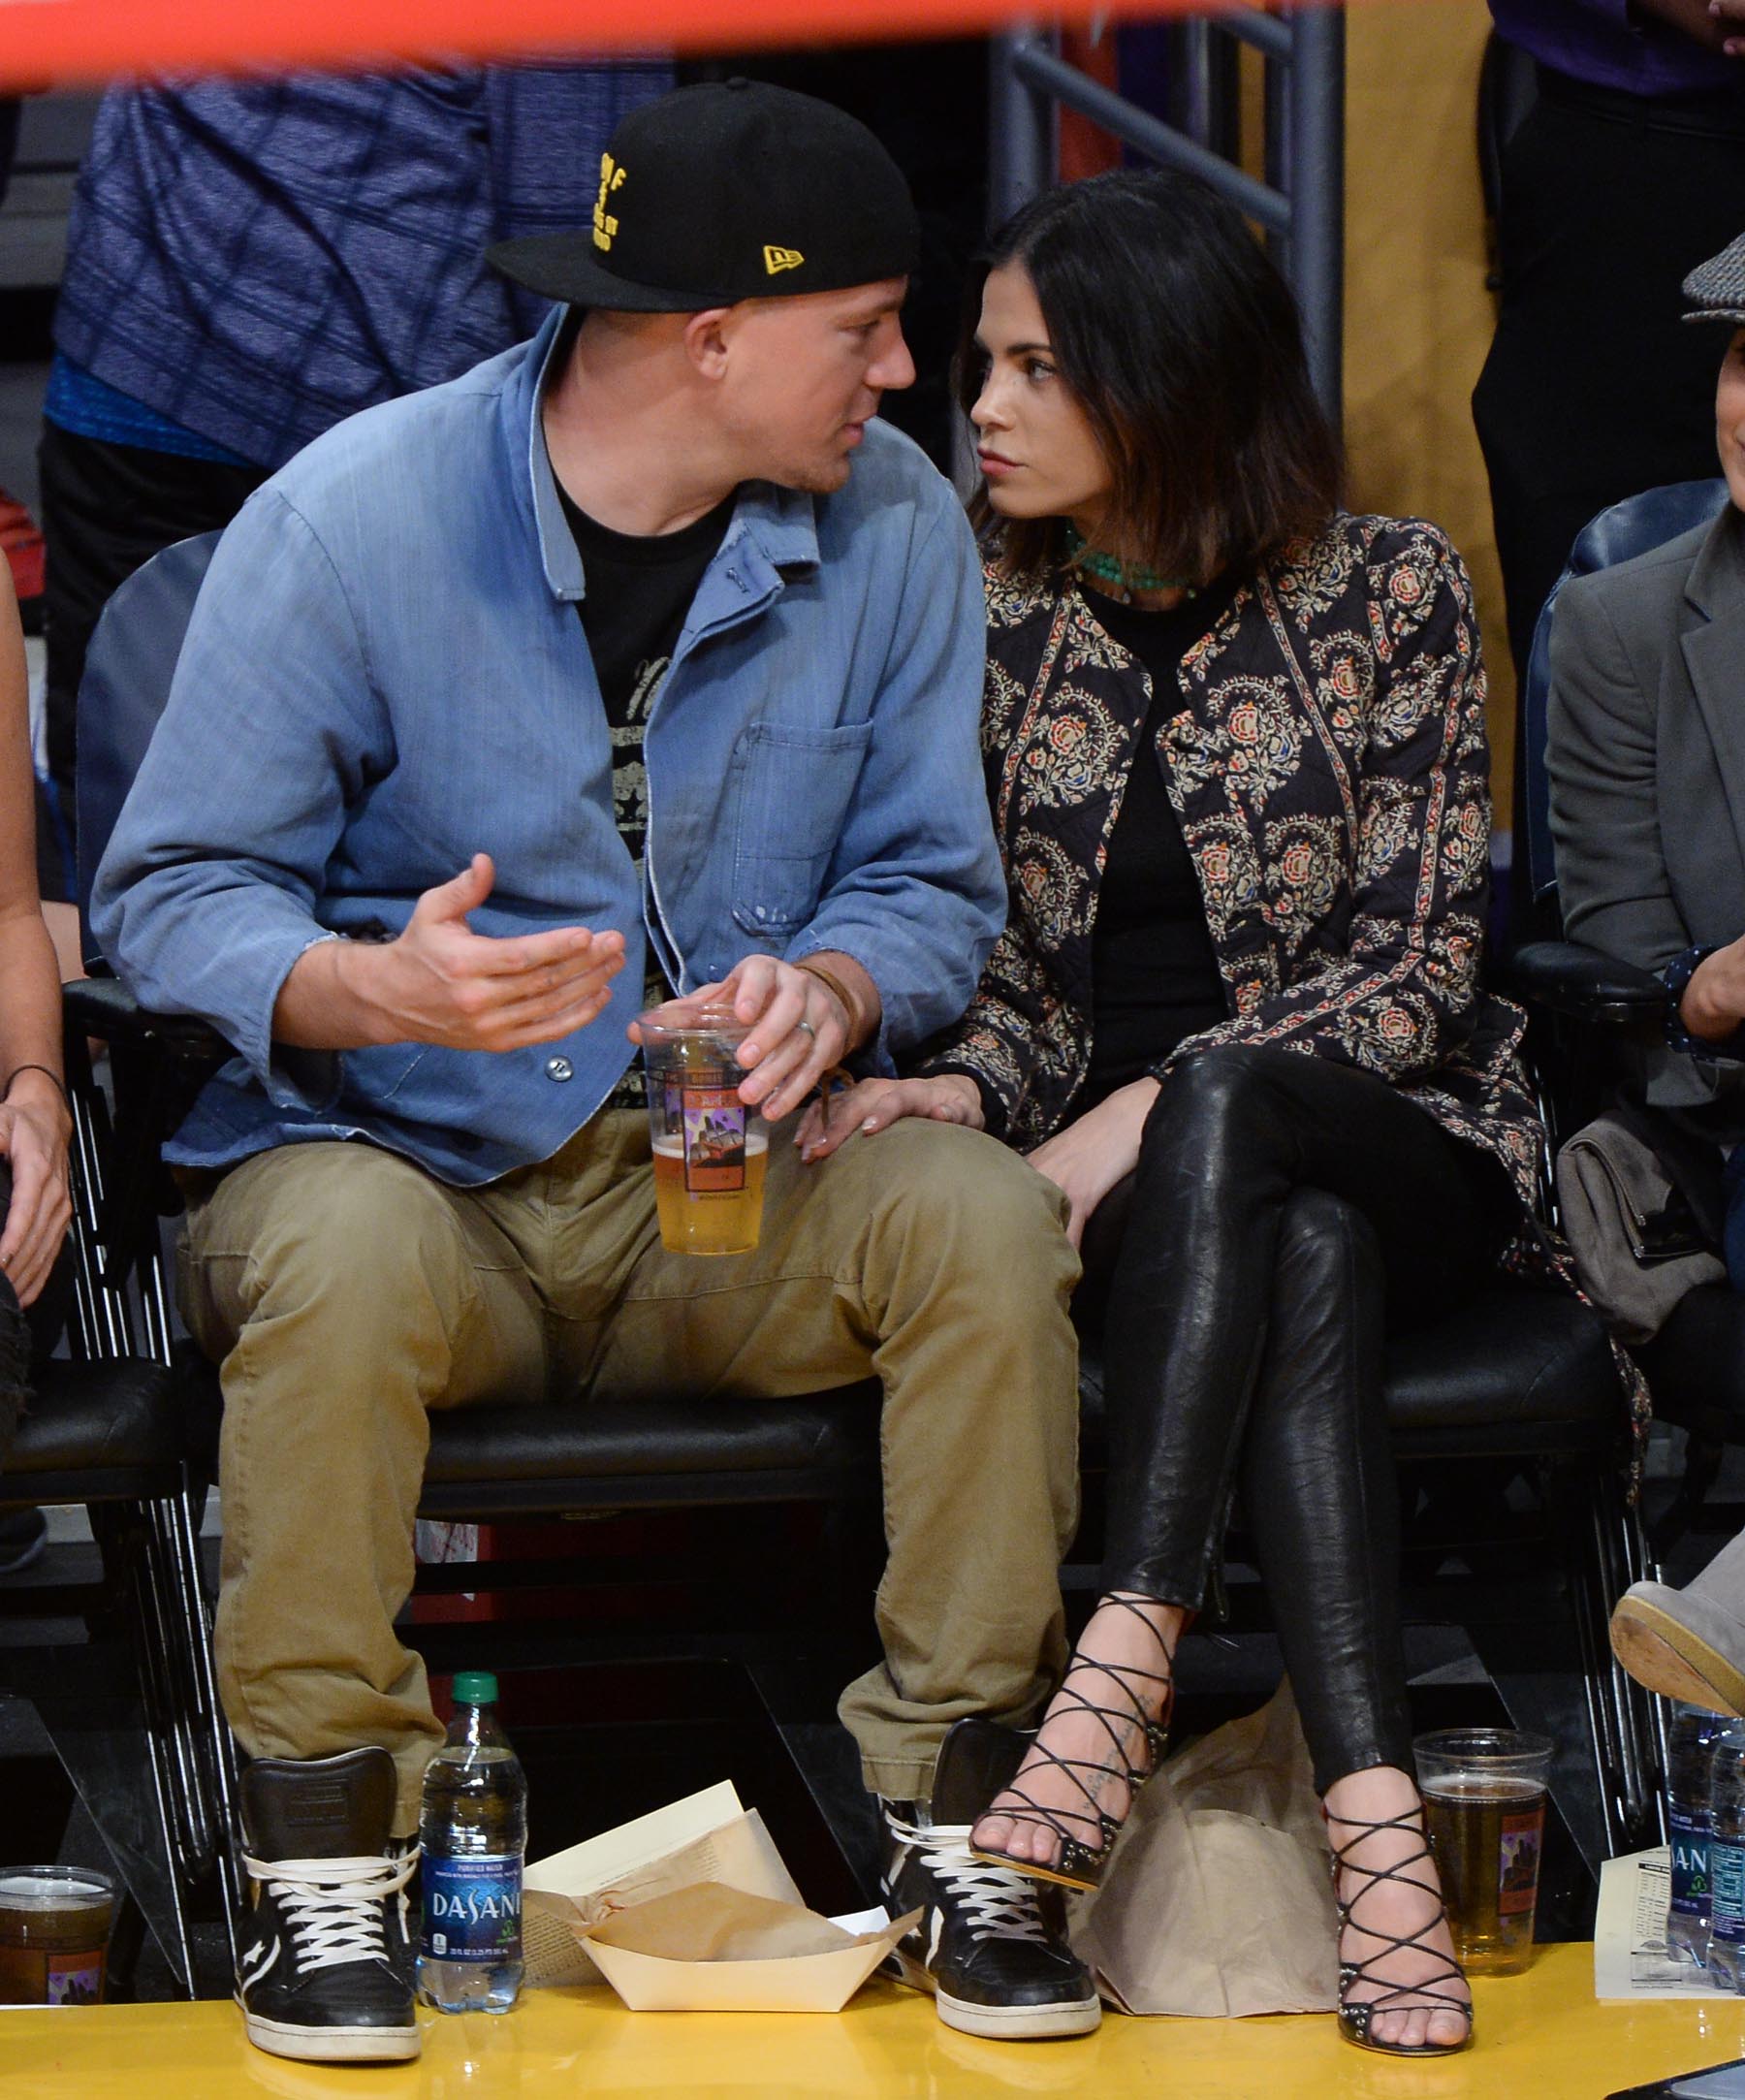 Jenna Dewan at the Staples Center to watch the Lakers